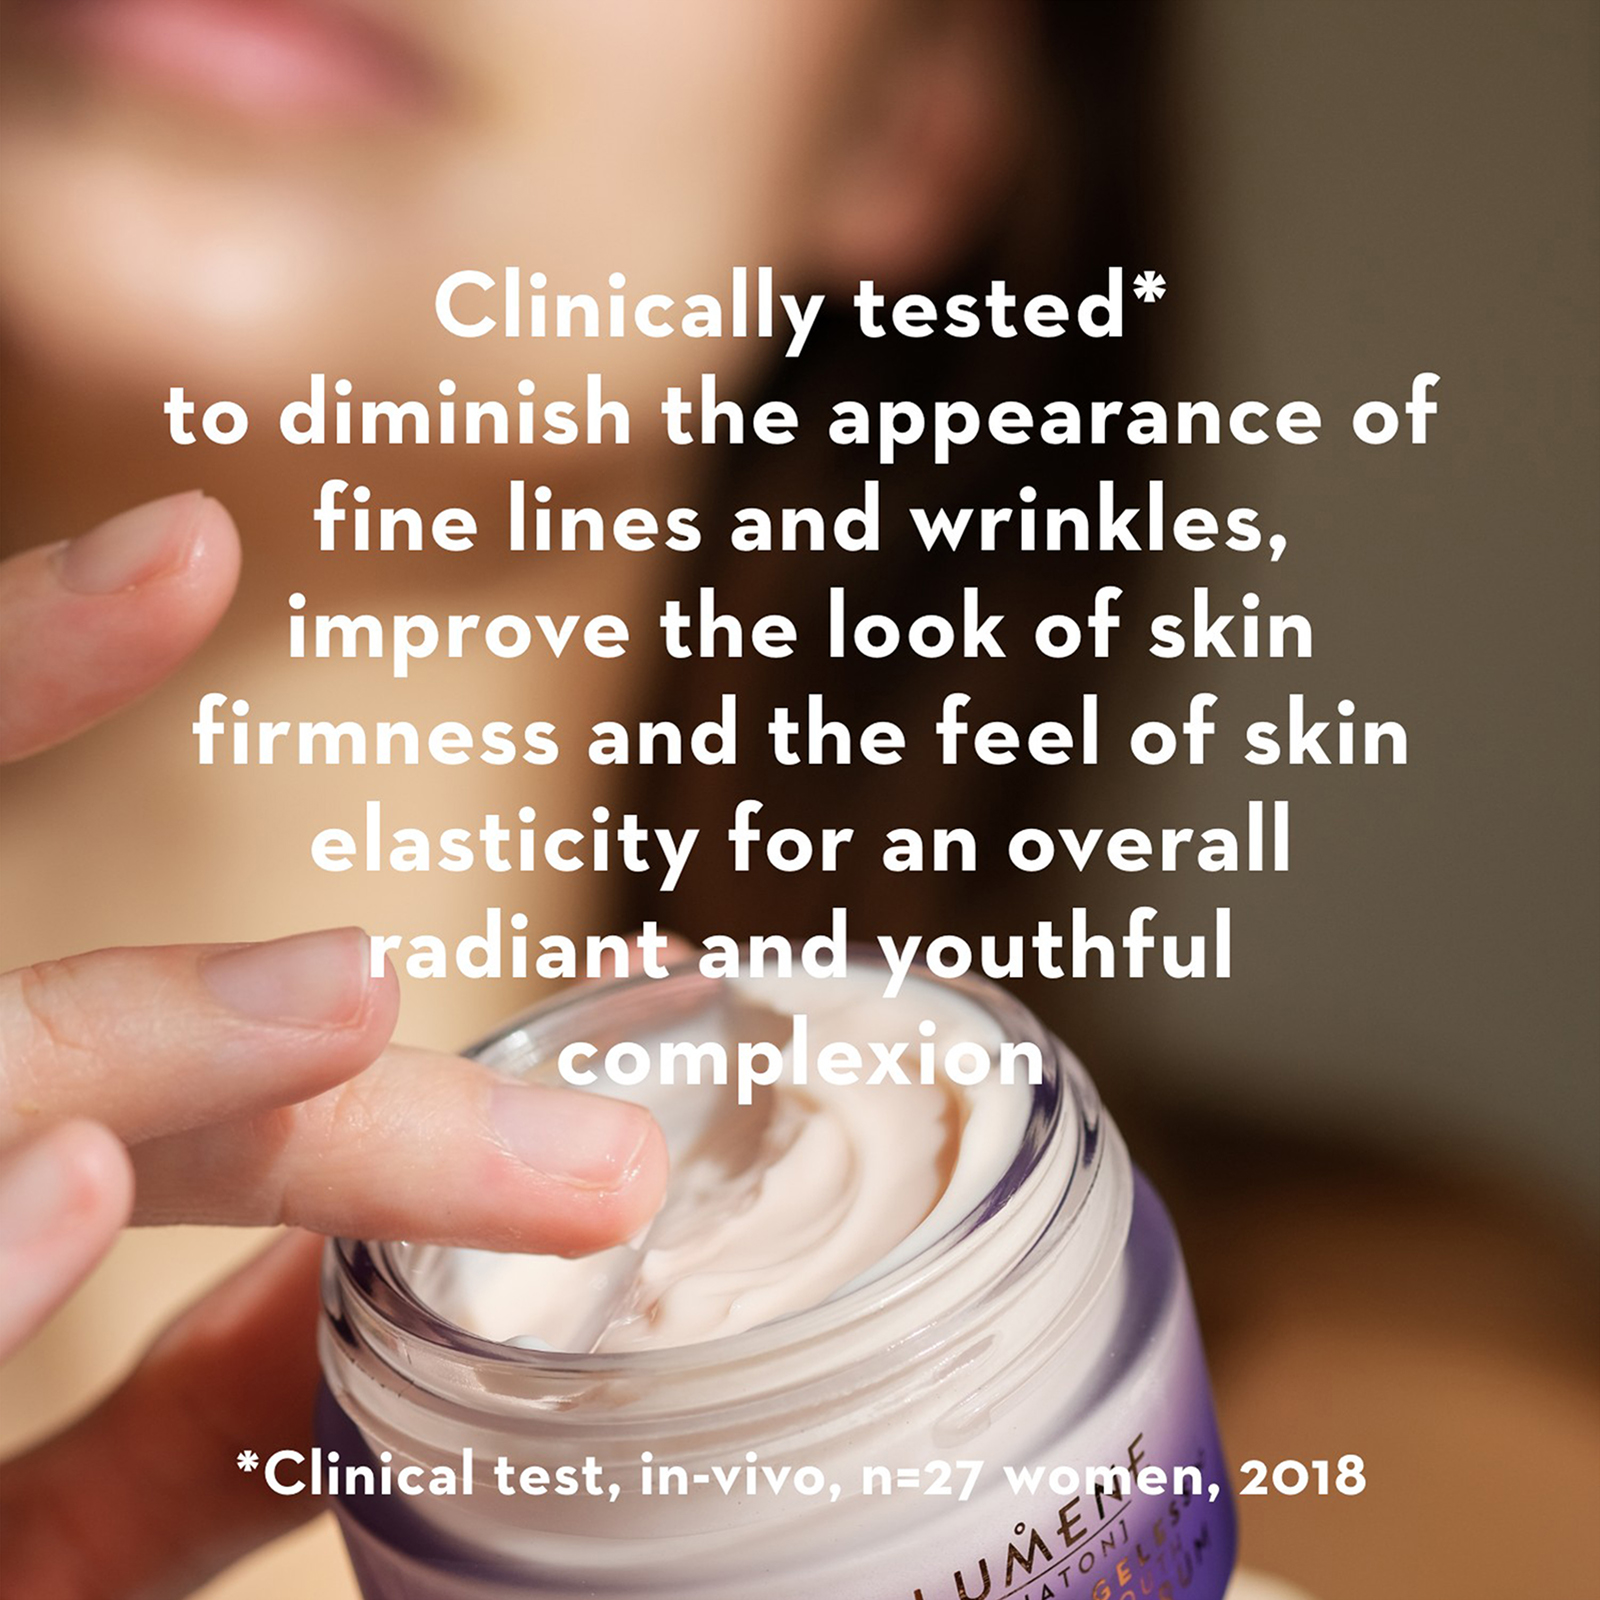 Clinically tested* to diminish the appearance of fine lines and wrinkles, improve the look of skin firmness and the feel of skin elasticity for an overall radiant and youthful complexion
            *Clinical test, in-vivo, n=27 women, 2018 573